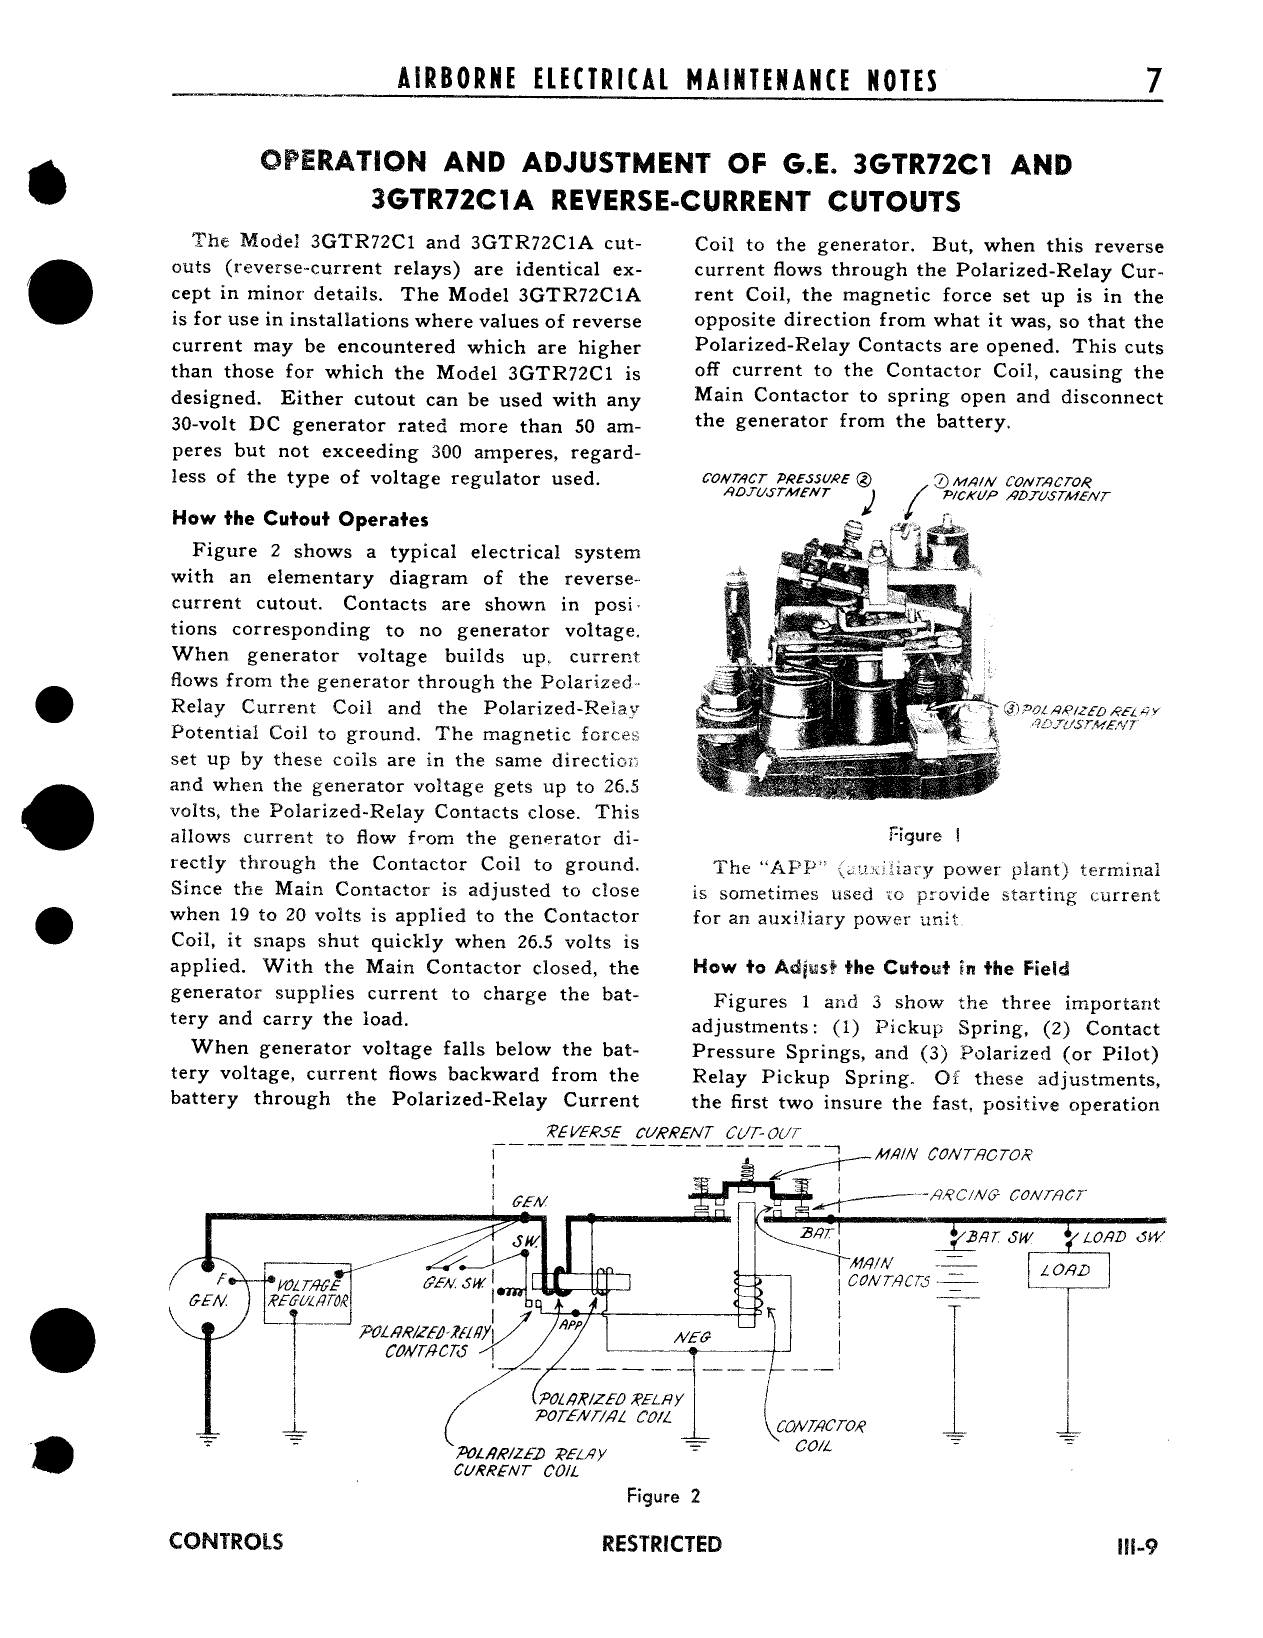 Sample page 1 from AirCorps Library document: Operation and Adjustment of GE 3GTR72C1, A Reverse Current Cutouts